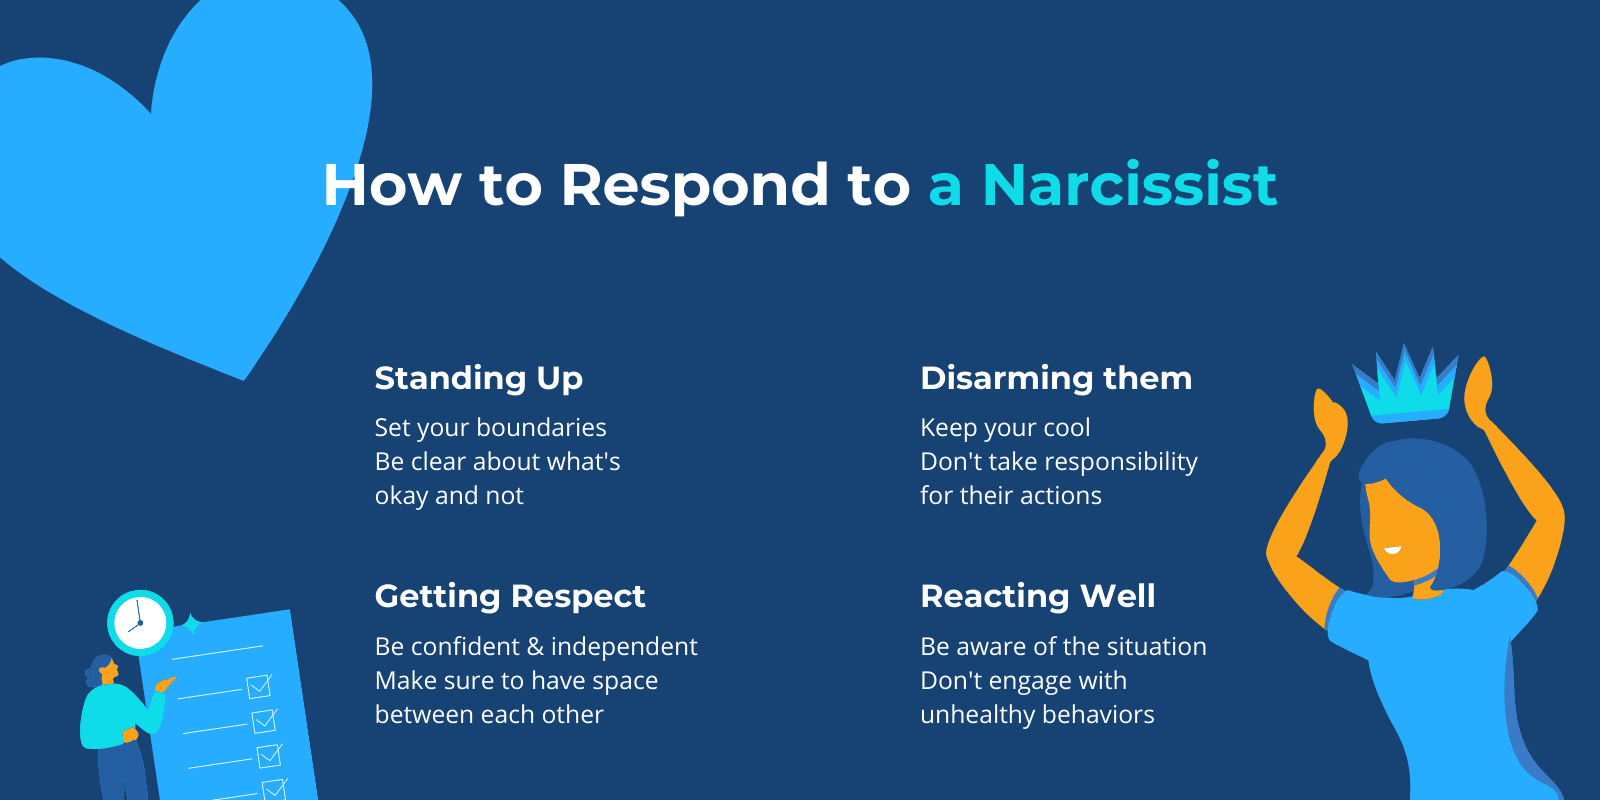 How to respond to a narcissist infographic with illustrations of narcissist and a checklist graphic